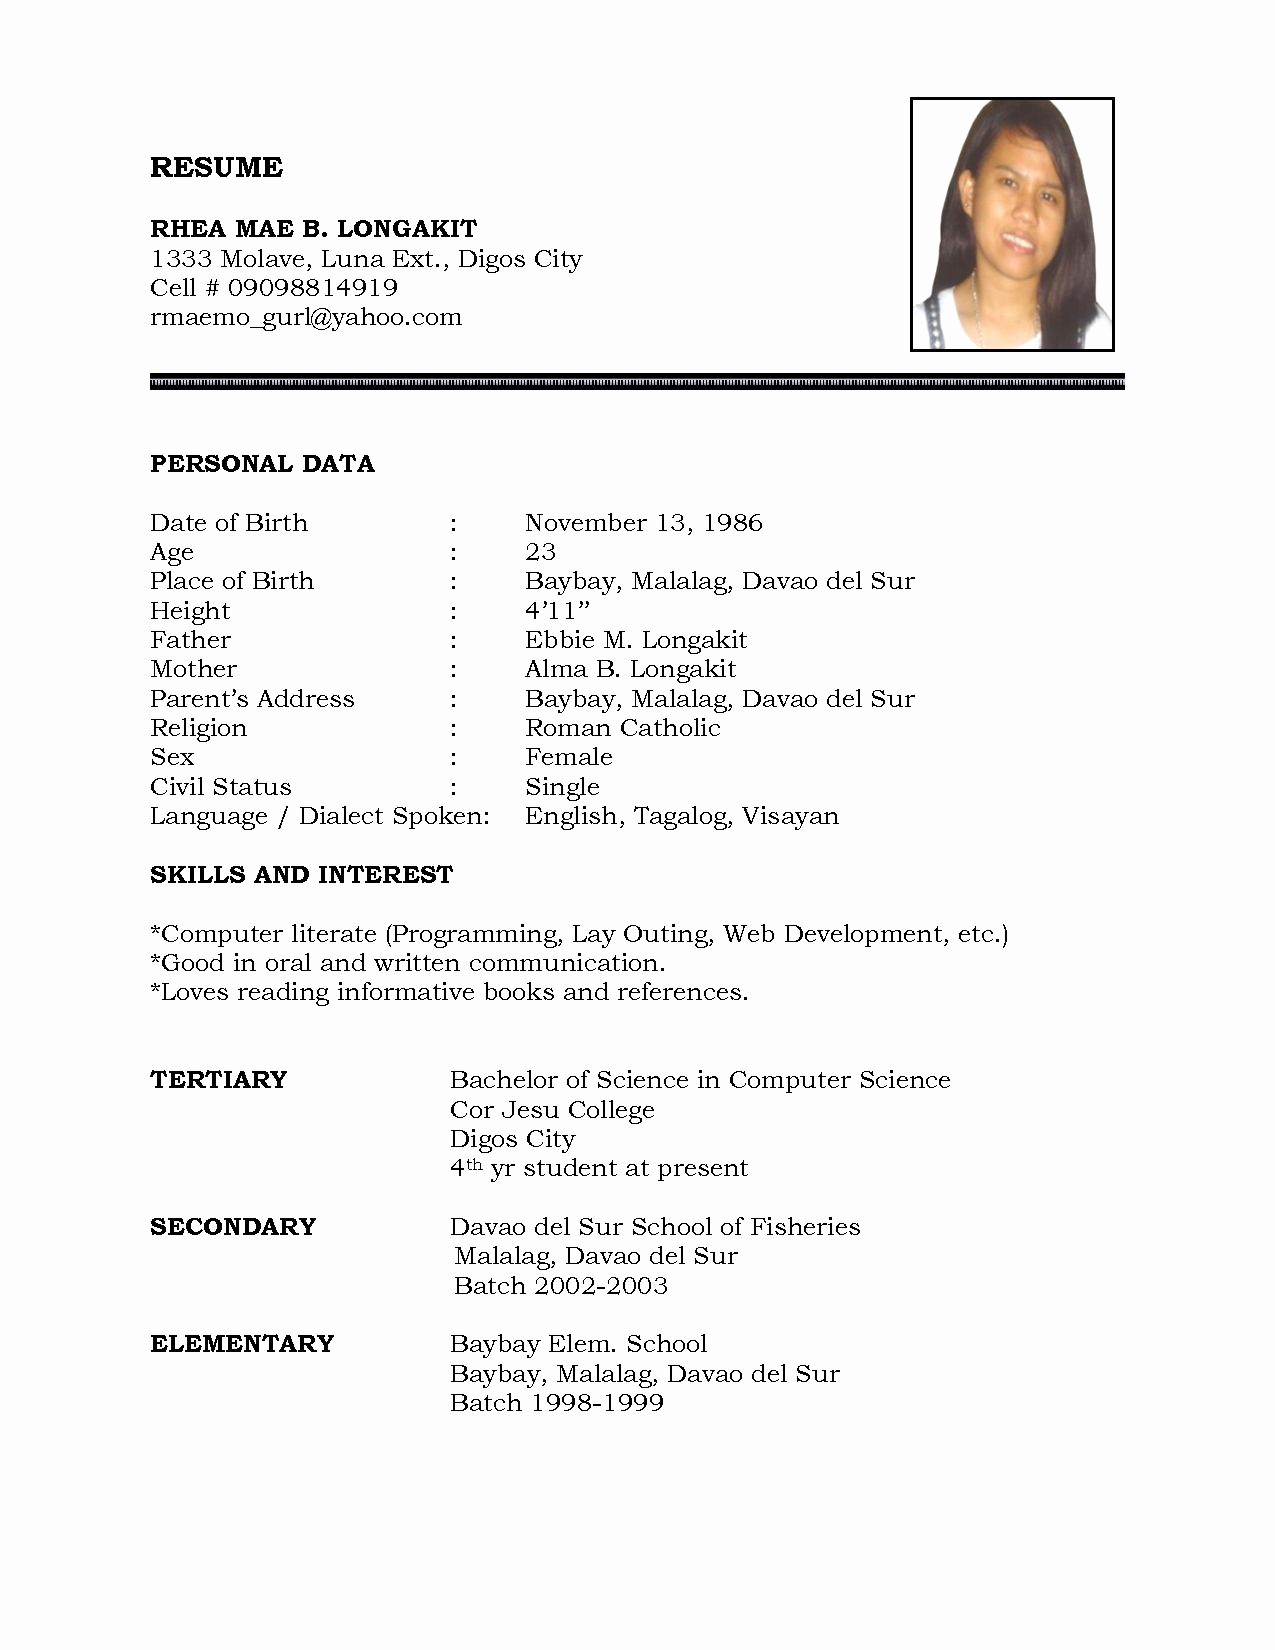 Form Of Resume for Job New Resume Sample Simple De9e2a60f the Simple format Resume